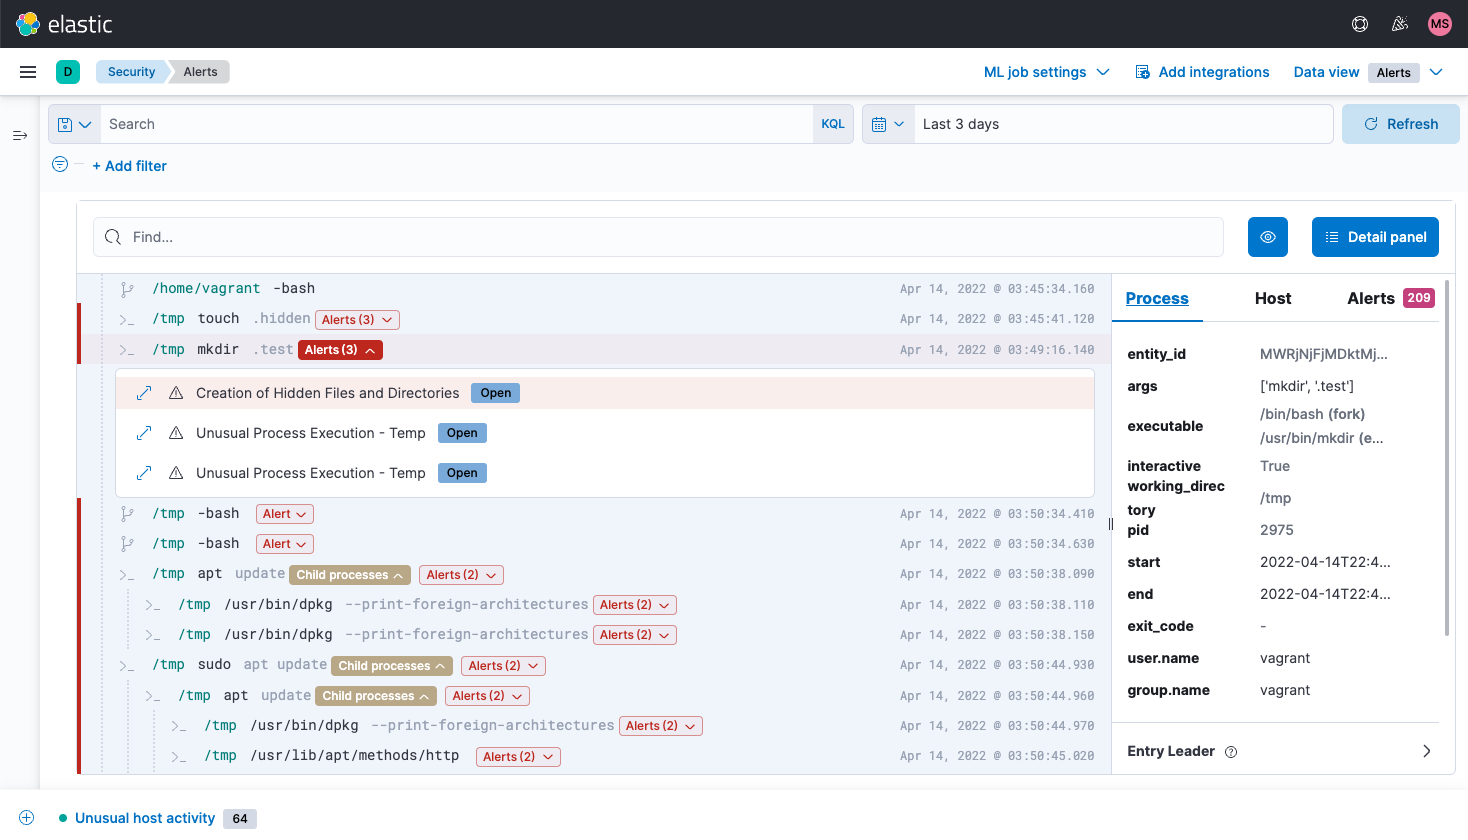 Analysis of cloud workload alert in screenshot showing session view in Elastic cloud security solution